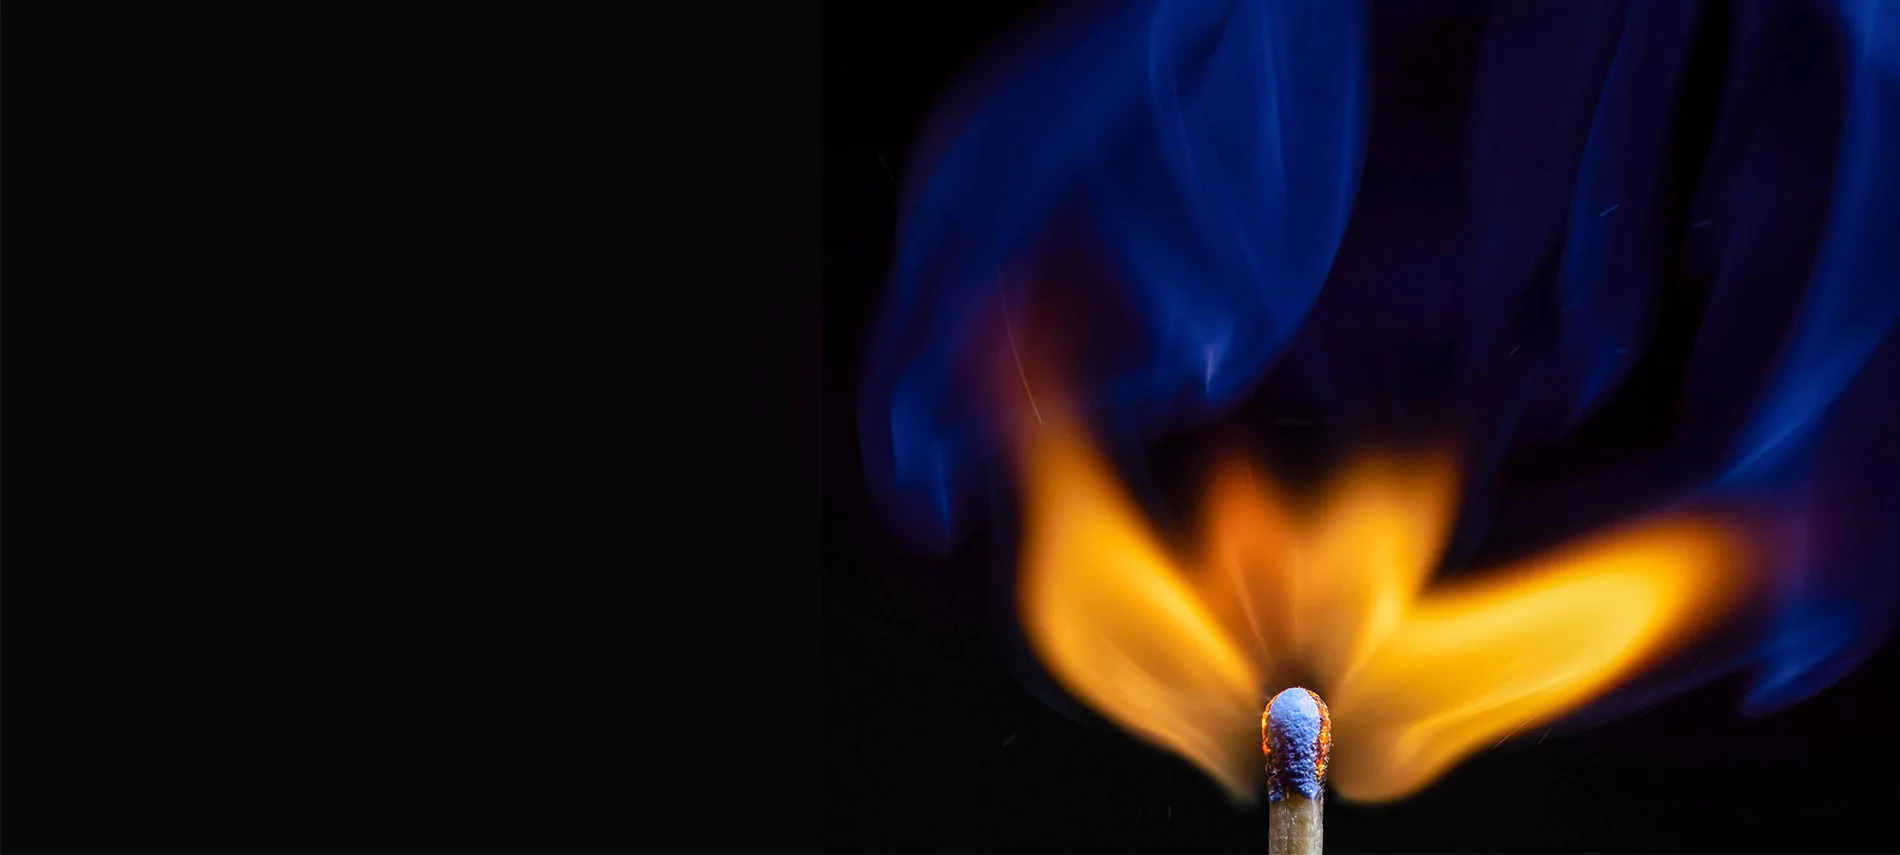 Close up photo of an ignited match with an orange and blue flame, representing Ignite Digital Services